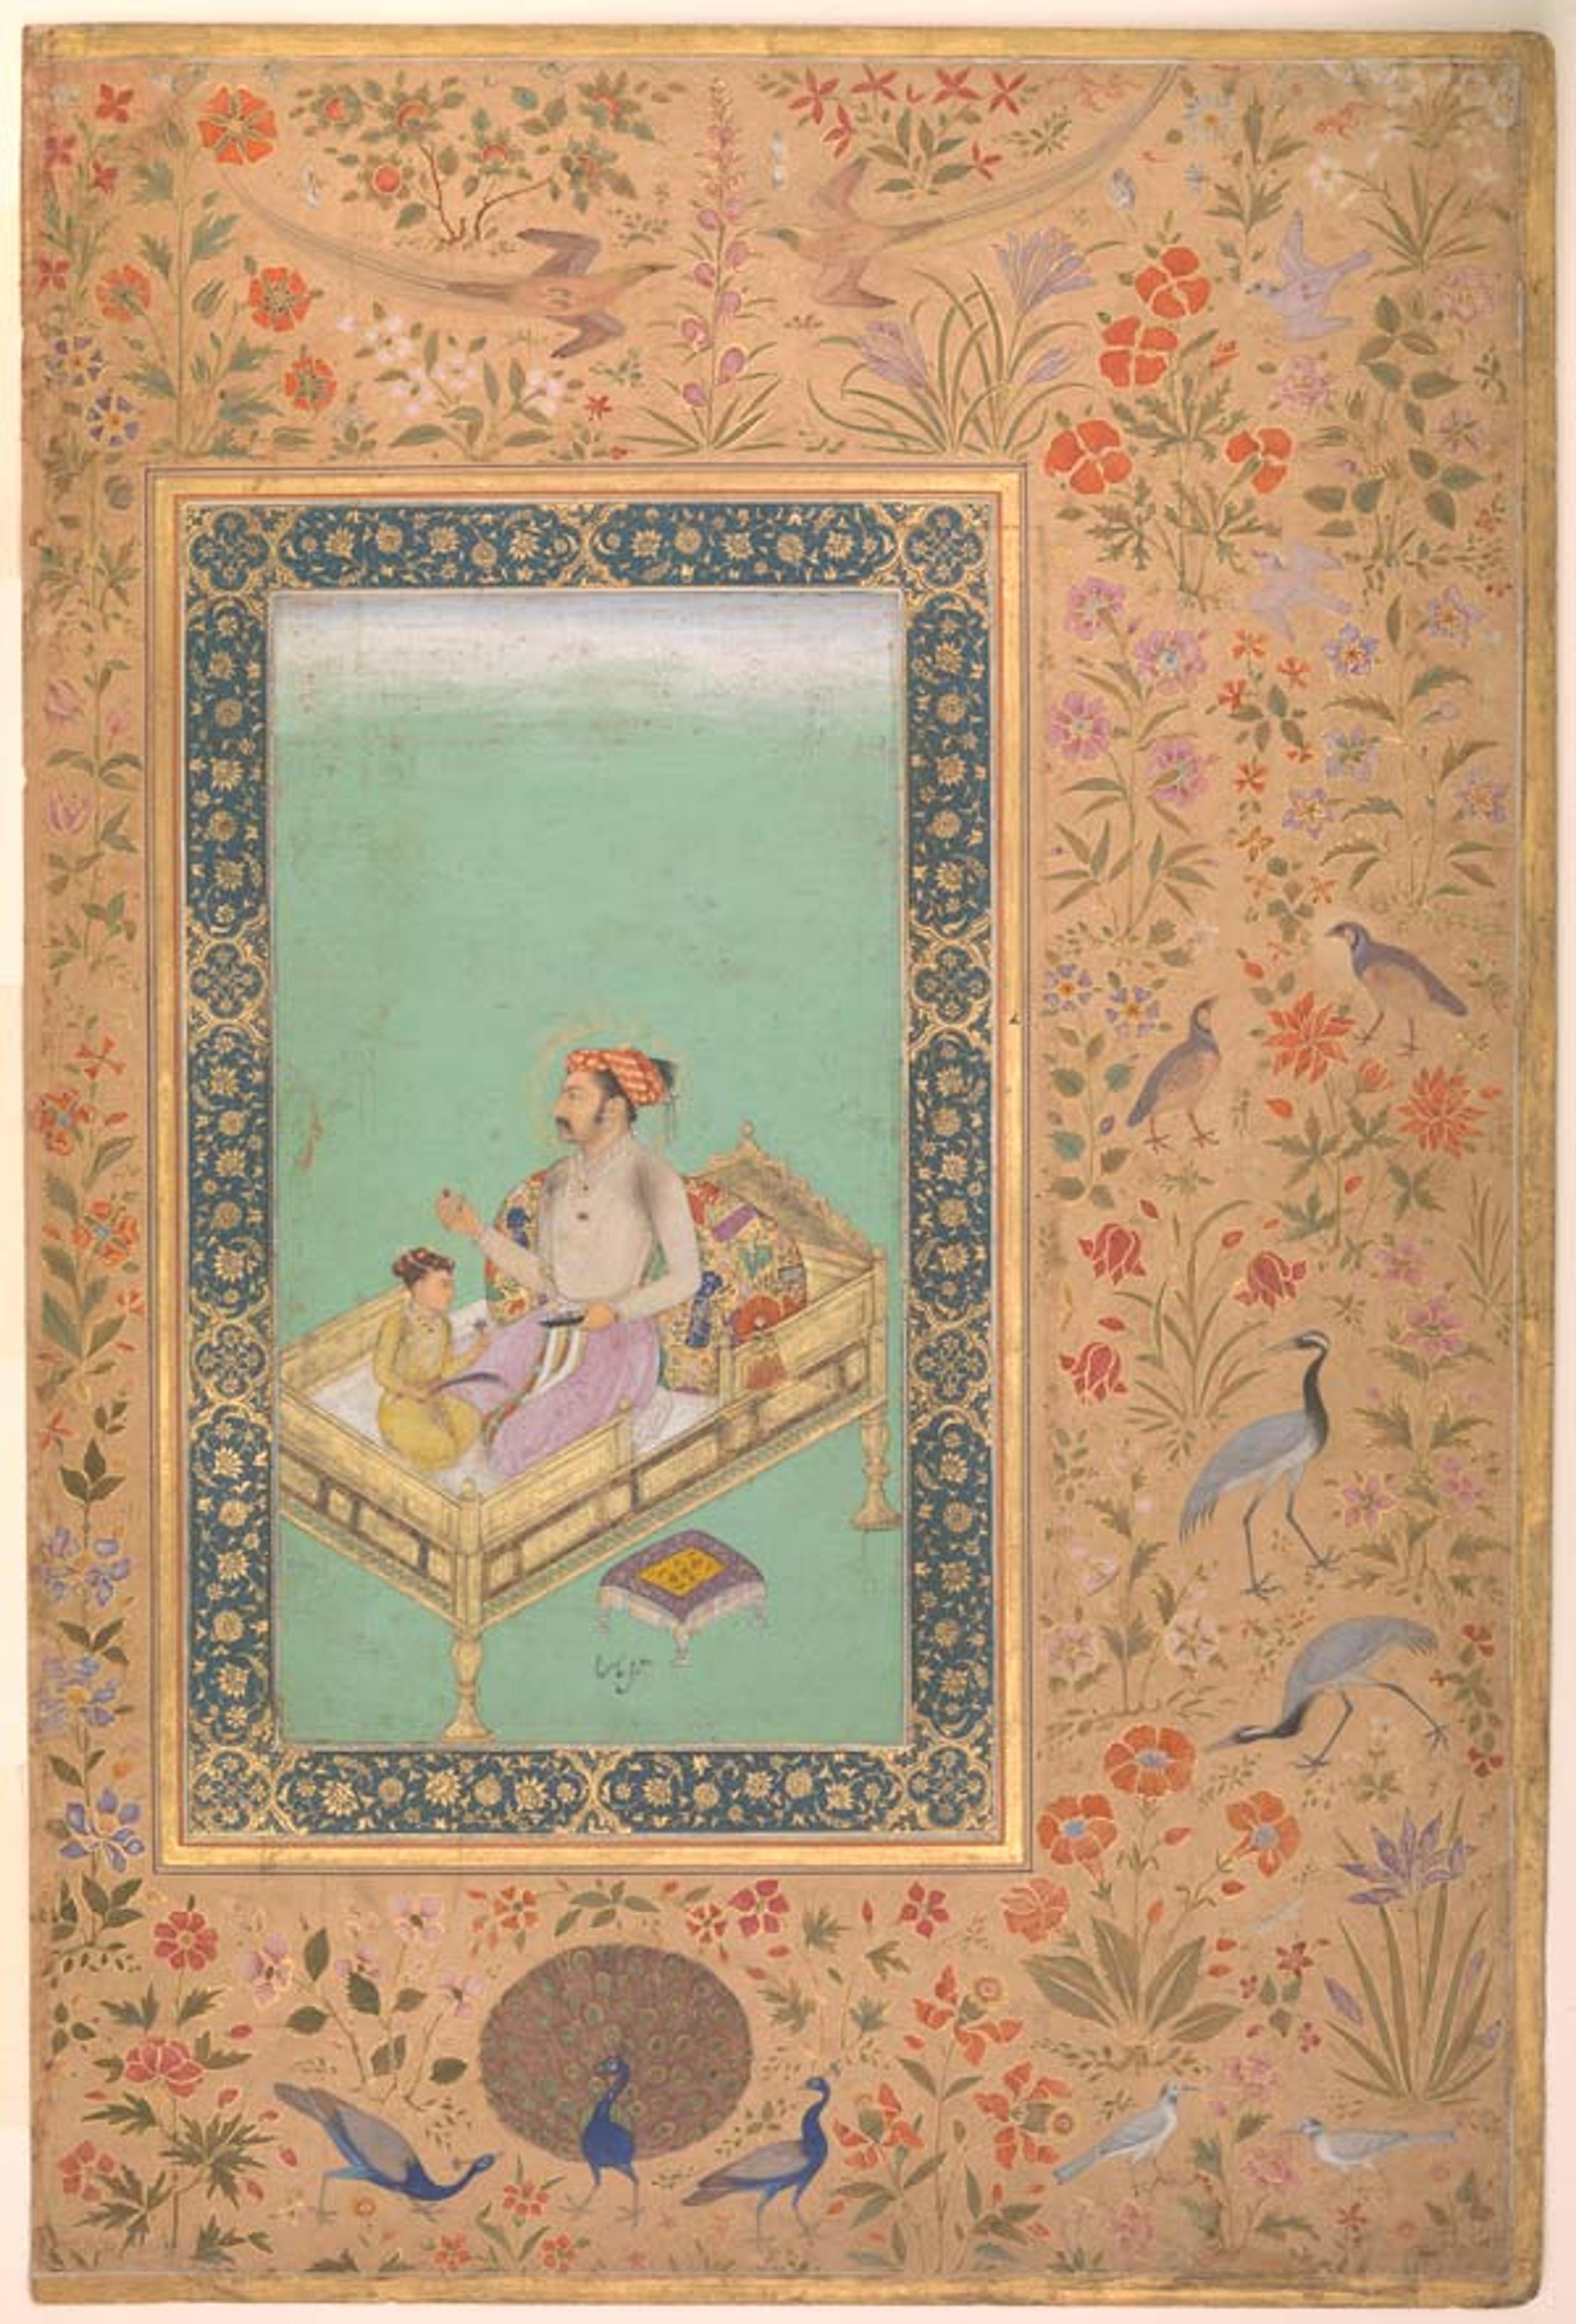 "The Emperor Shah Jahan with his Son Dara Shikoh", Folio from the Shah Jahan Album. Painting by Nanha, calligrapher Mir 'Ali Haravi (d. ca.1550). Verso: ca. 1620; recto: ca. 1530–50. India. Ink, opaque watercolor, and gold on paper; H. 15 5/16 in. (38.9 cm) x W. 10 5/16 in. (26.2 cm). The Metropolitan Museum of Art, New York, Purchase, Rogers Fund and The Kevorkian Foundation Gift, 1955 (55.121.10.36)